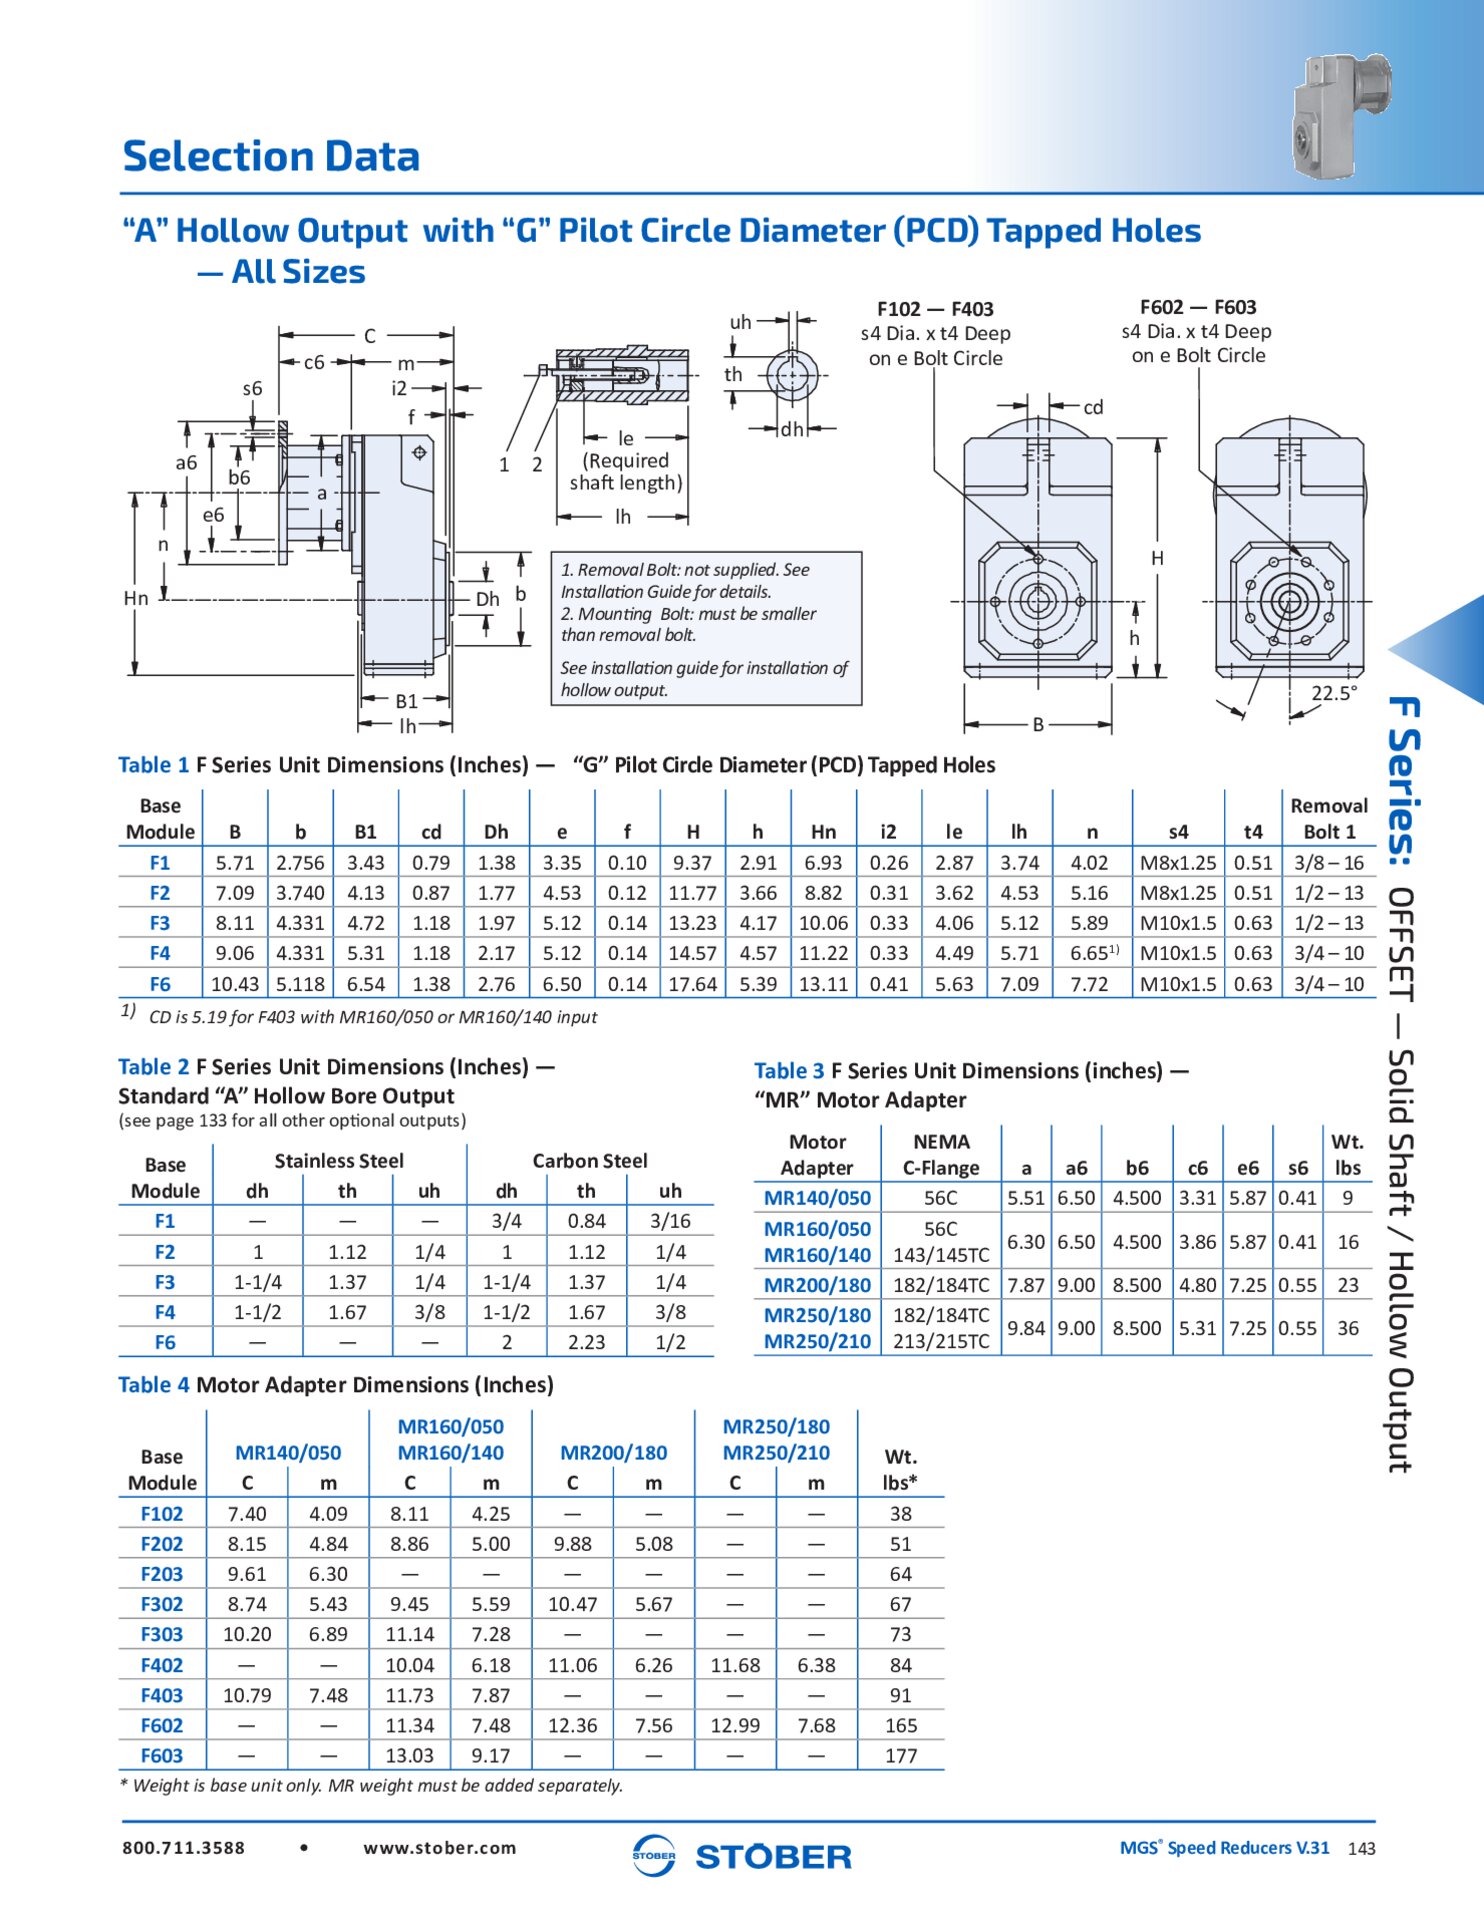 MGS Speed Reducers F Dimensions